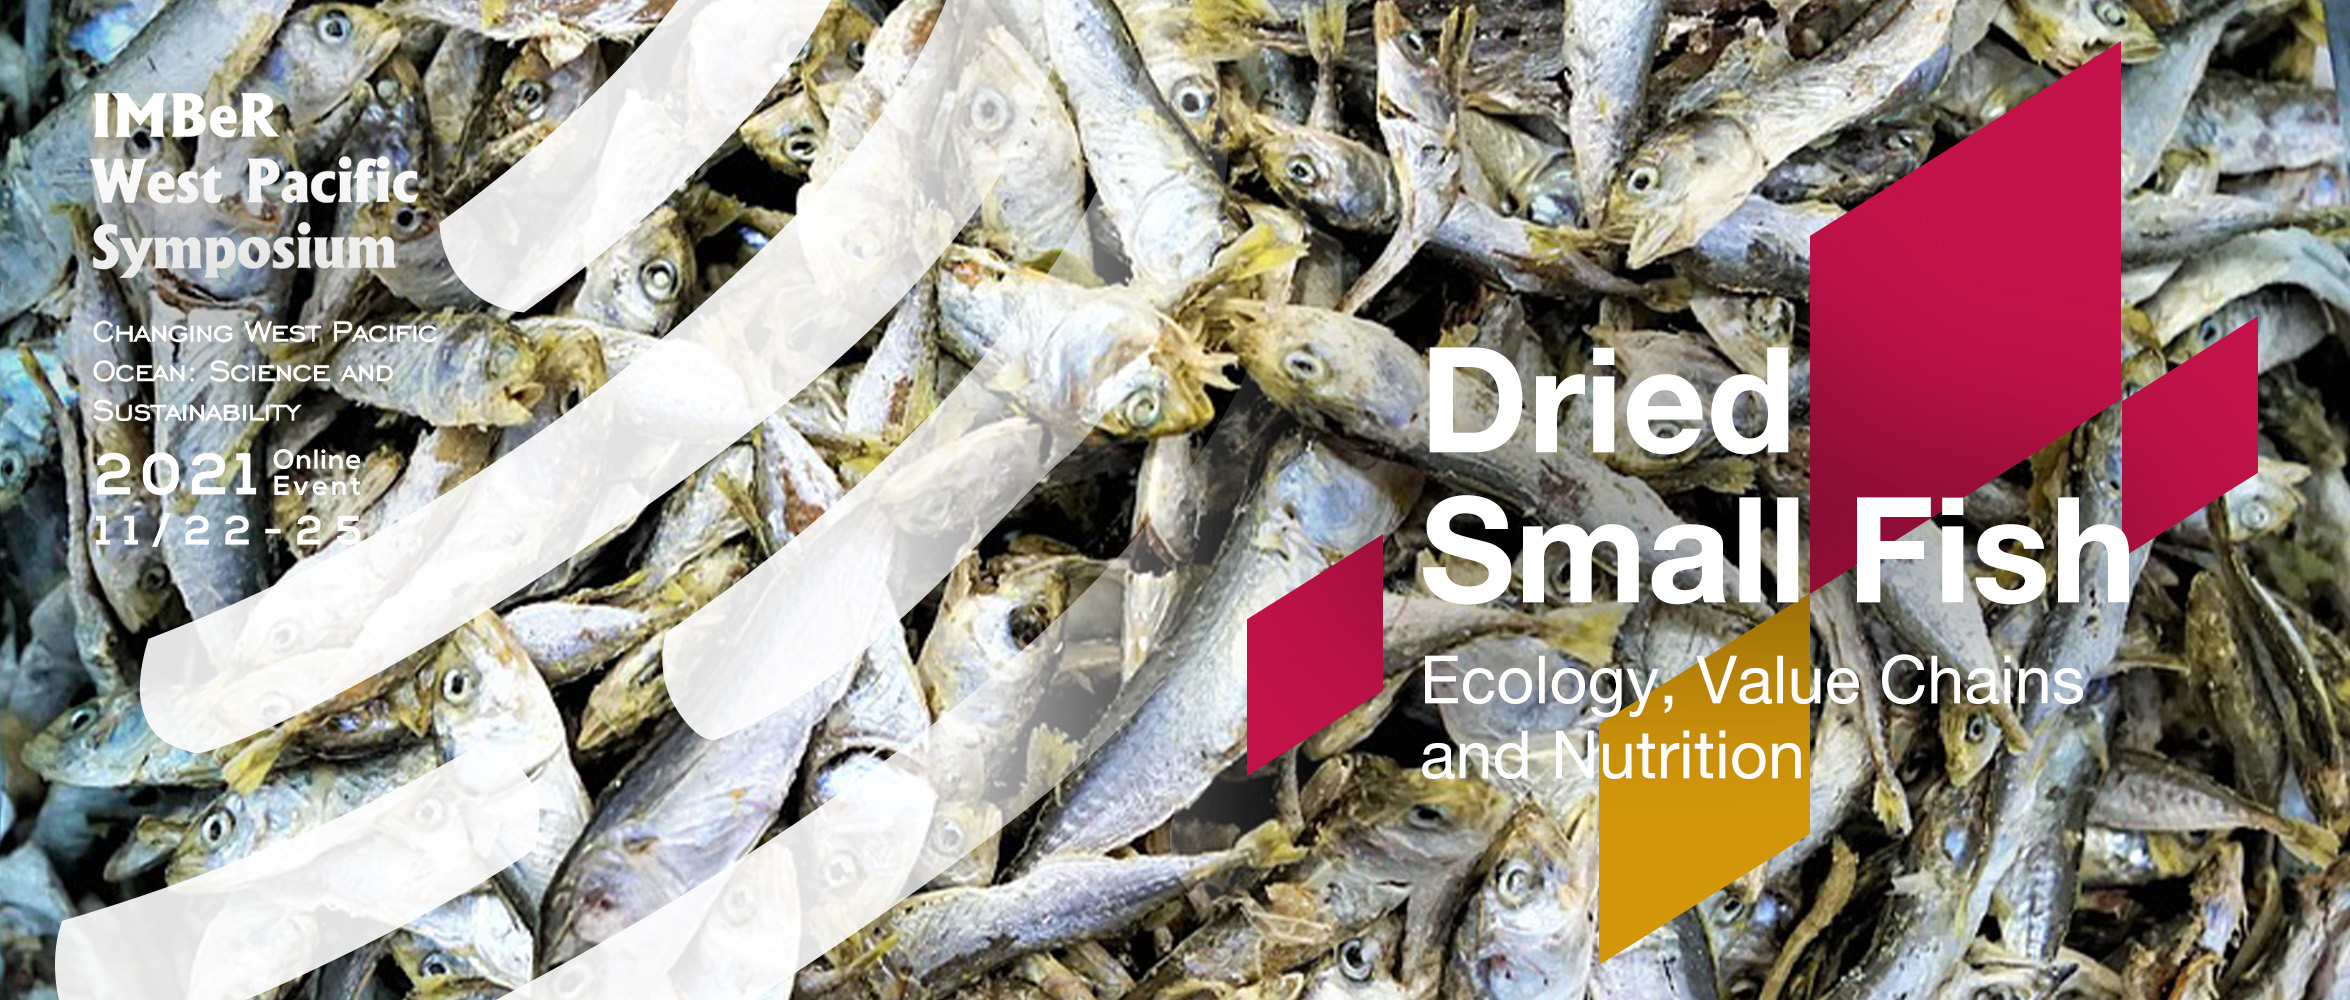 IMBeR West Pacific Symposium 2021: Dried Small Fish: Ecology, Value Chains and Nutrition